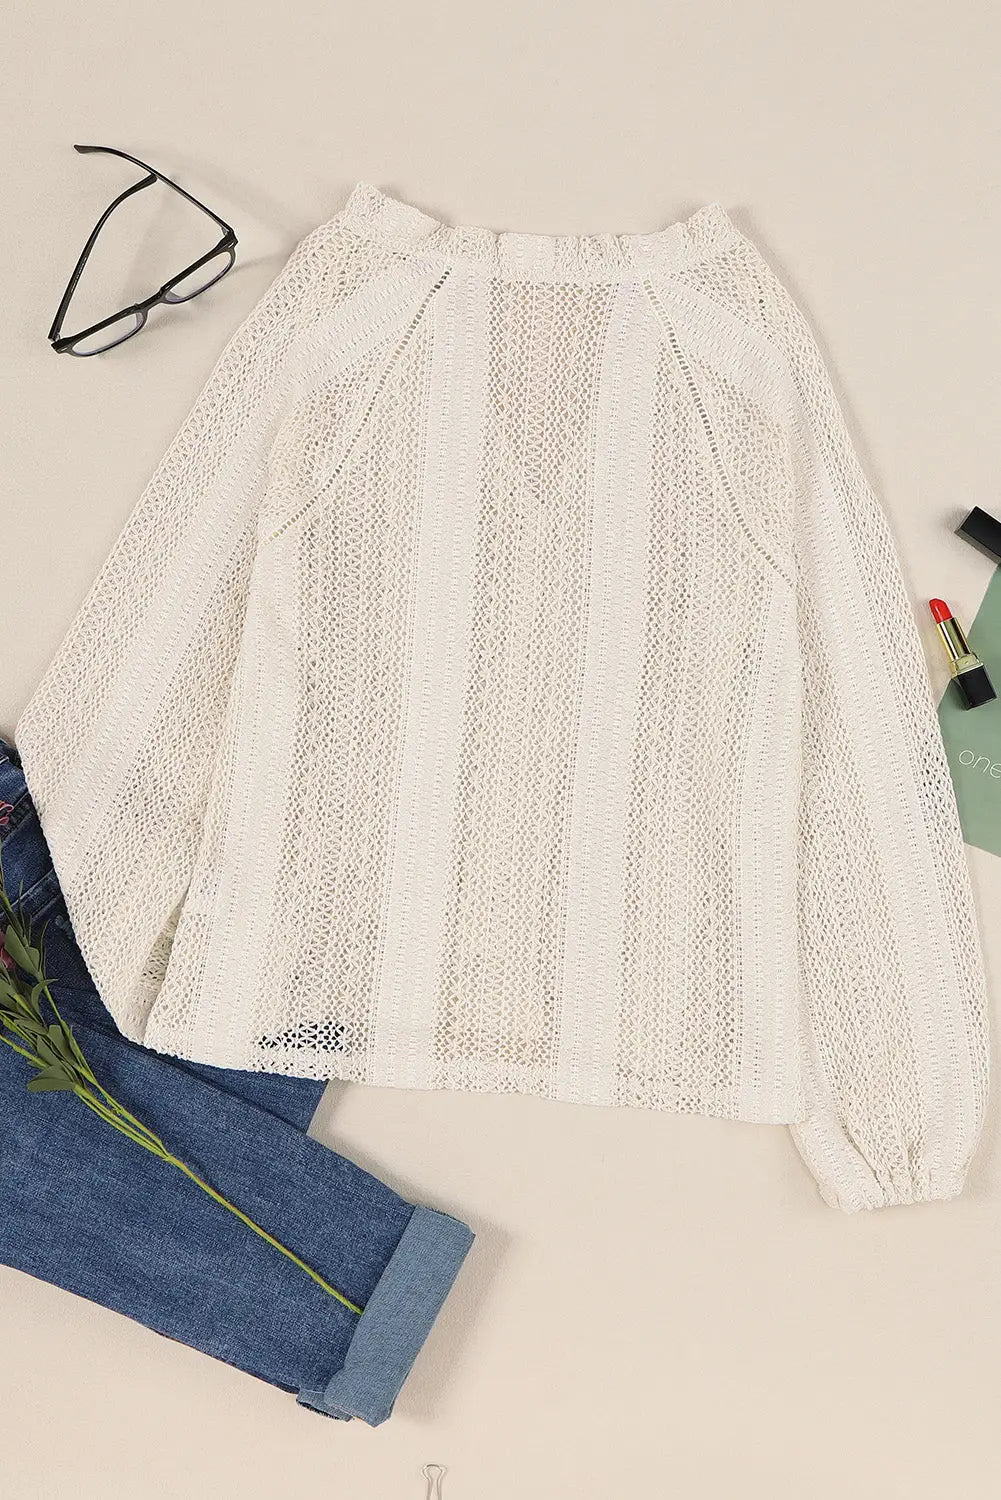 White v-neck long sleeve button up lace shirt - tops